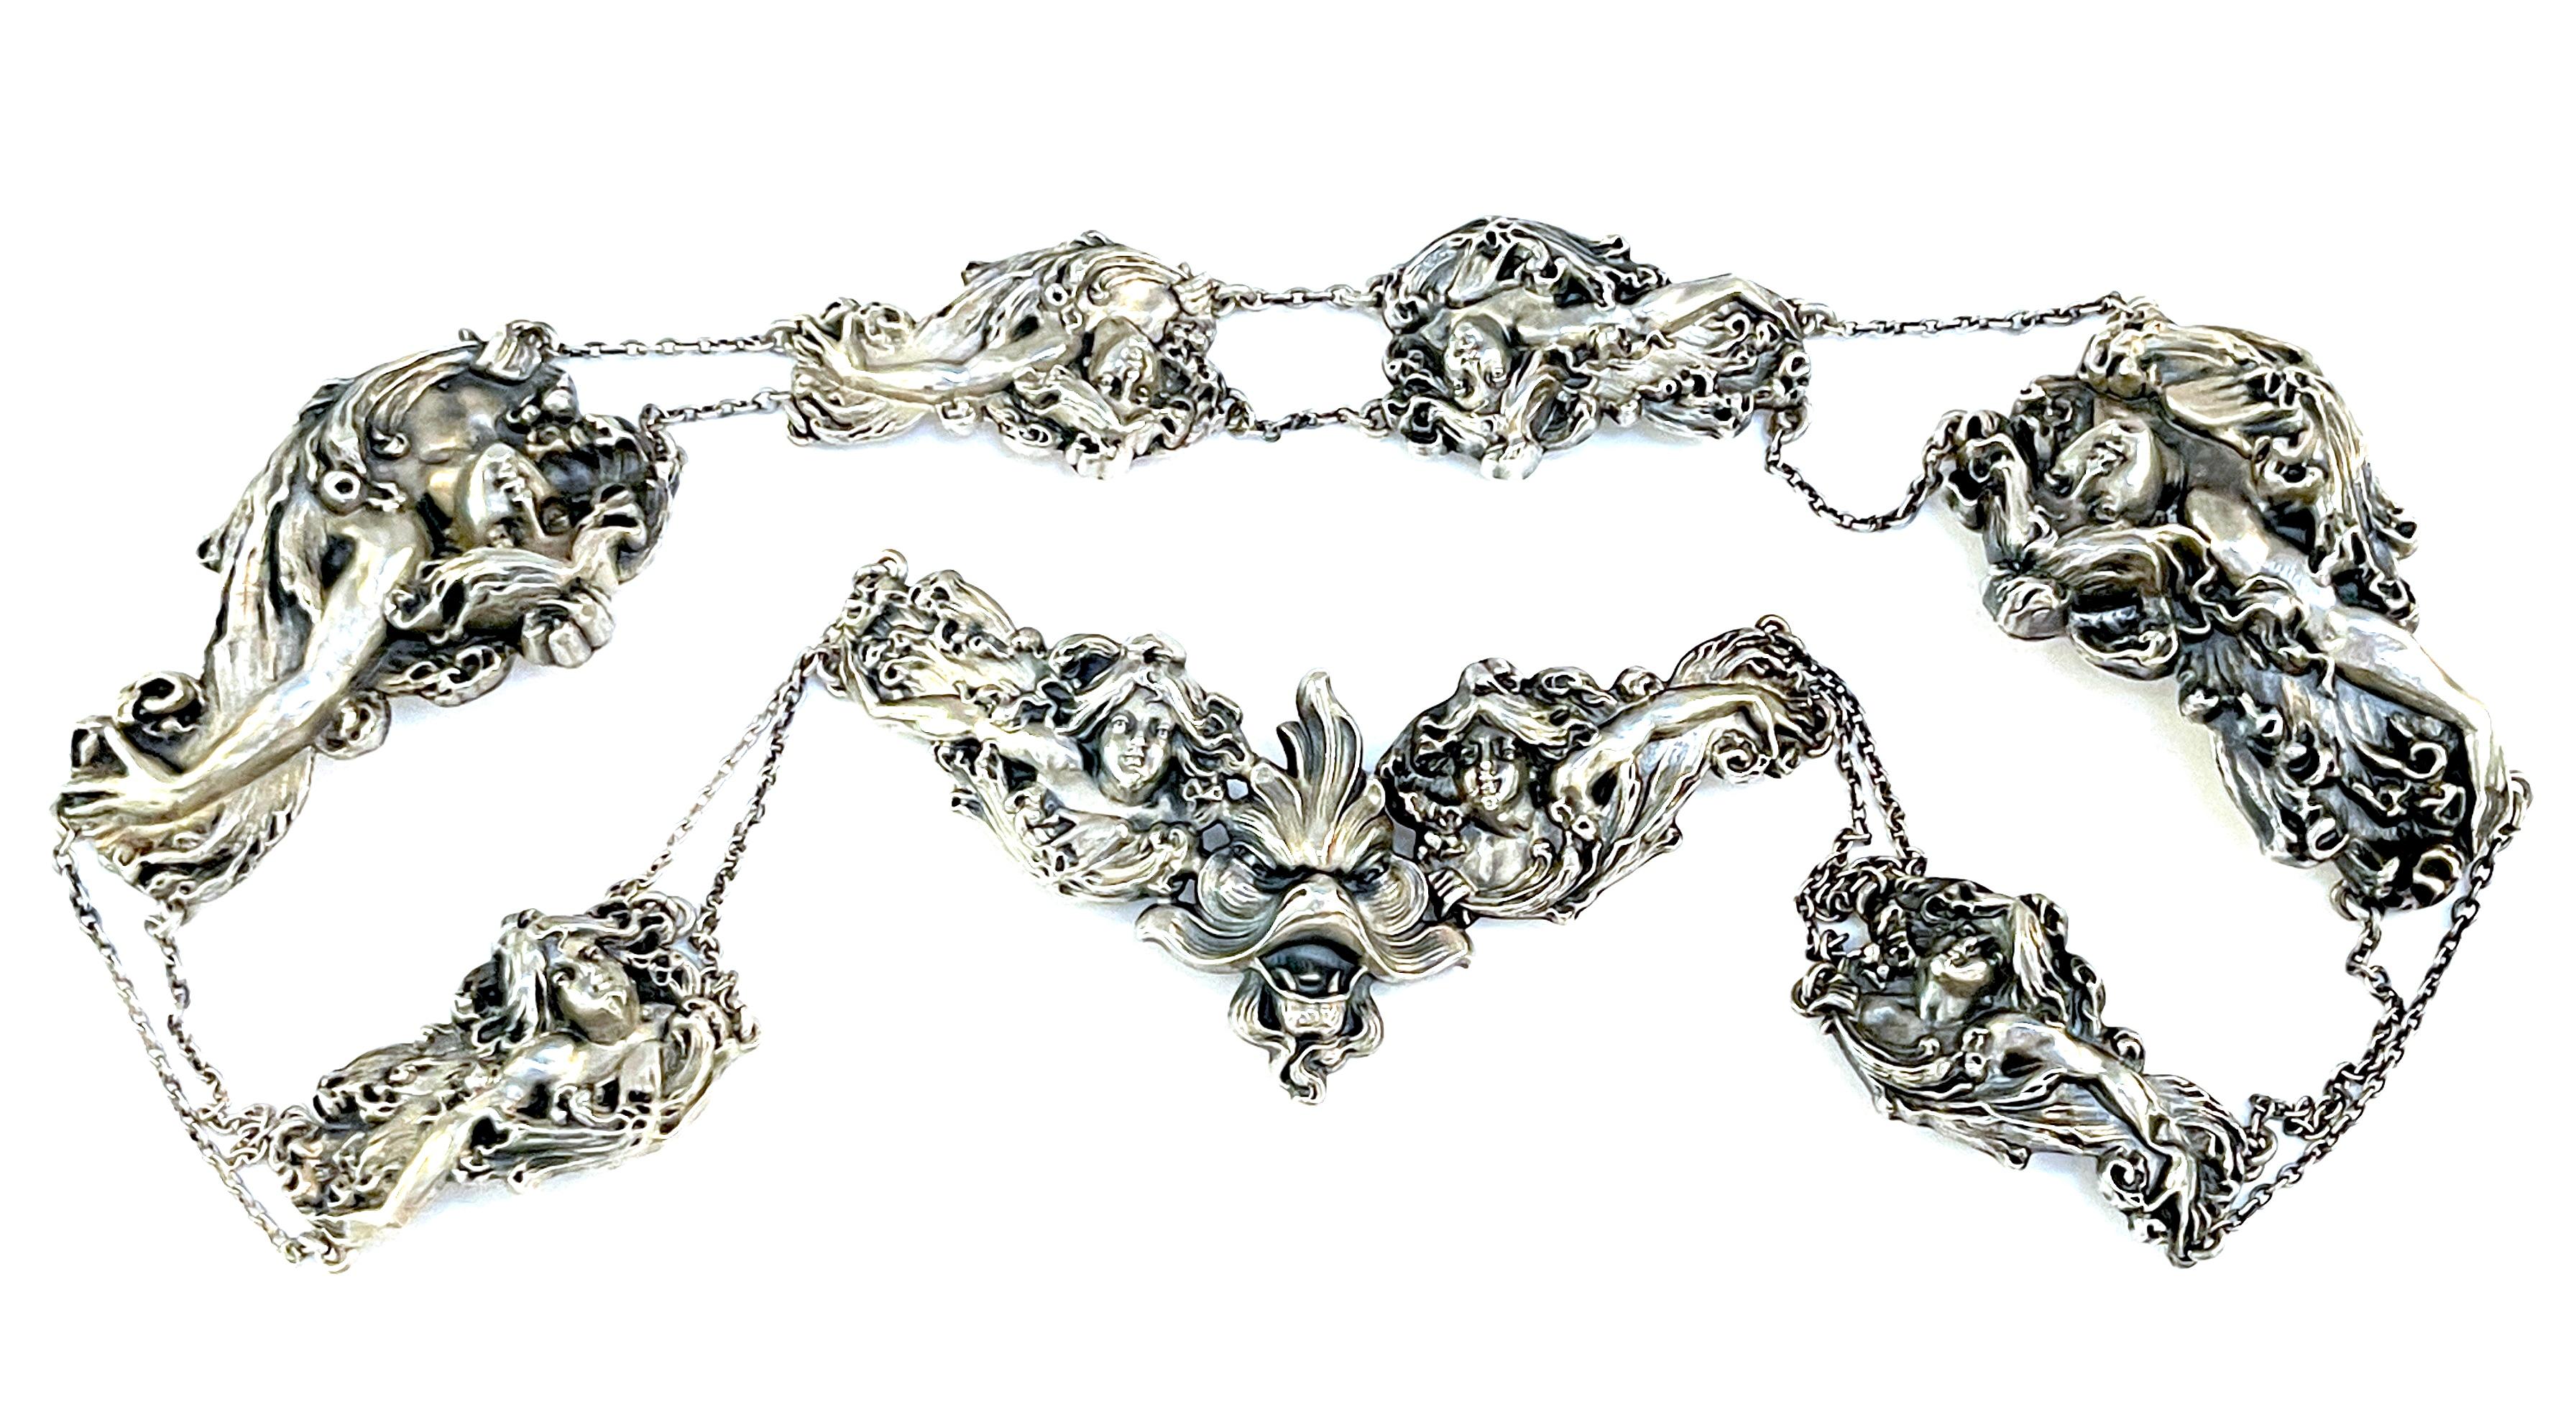 Art Nouveau Sterling Figural 8 Piece Belt by William B. Kerr Silver Company 
USA, circa 1890s

This Art Nouveau sterling silver belt by the esteemed William B. Kerr Silver Company stands as a true American masterpiece, an embodiment of the 1890s